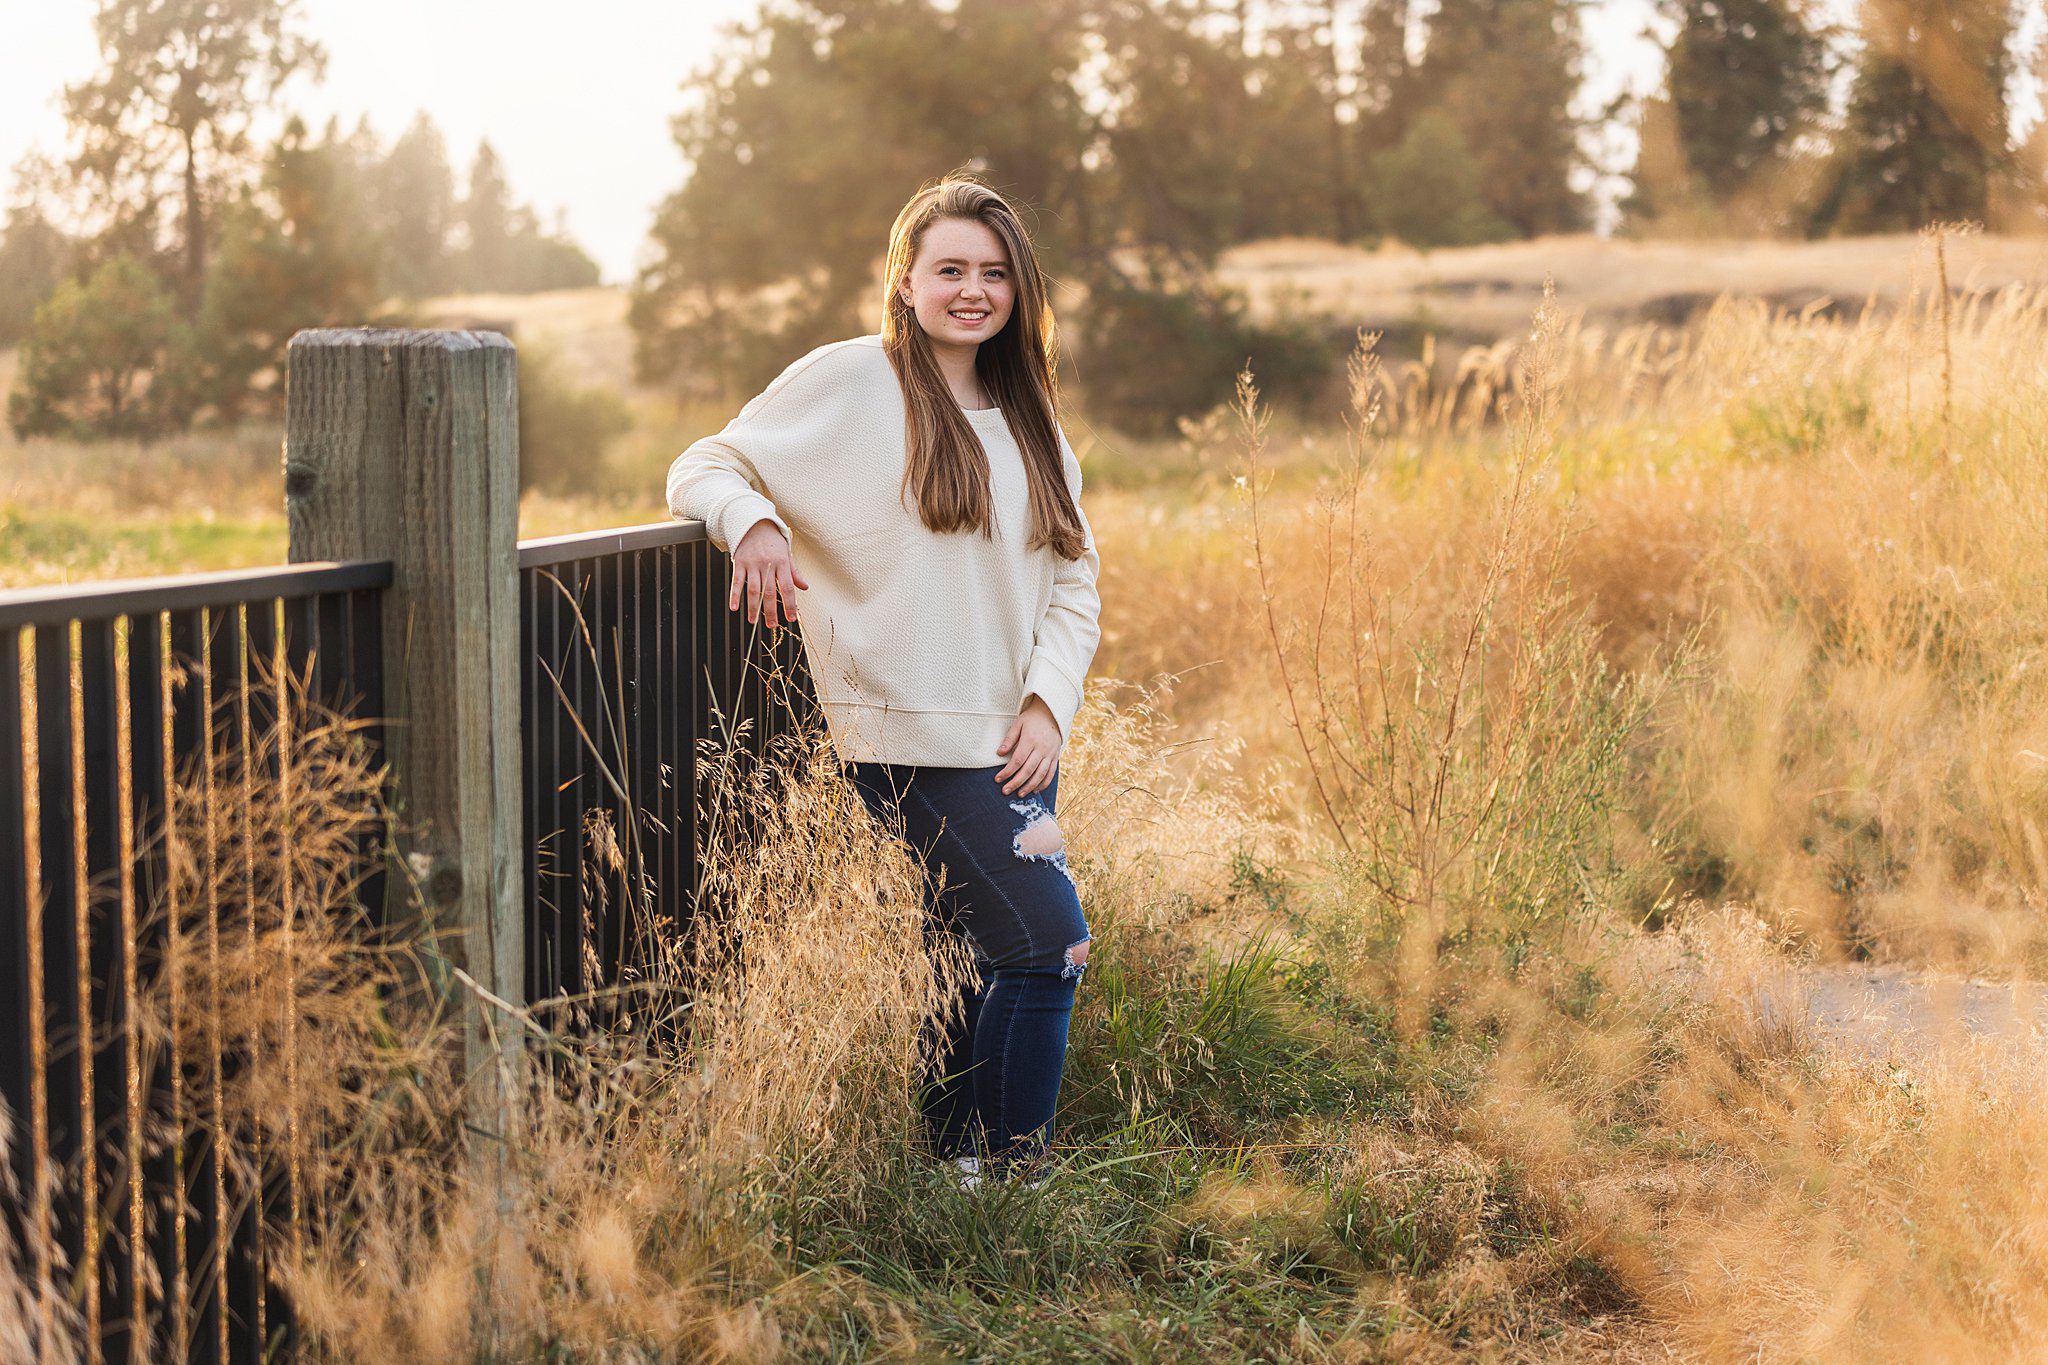 A high school senior stands against a metal fence with wooden posts in a golden field at sunset